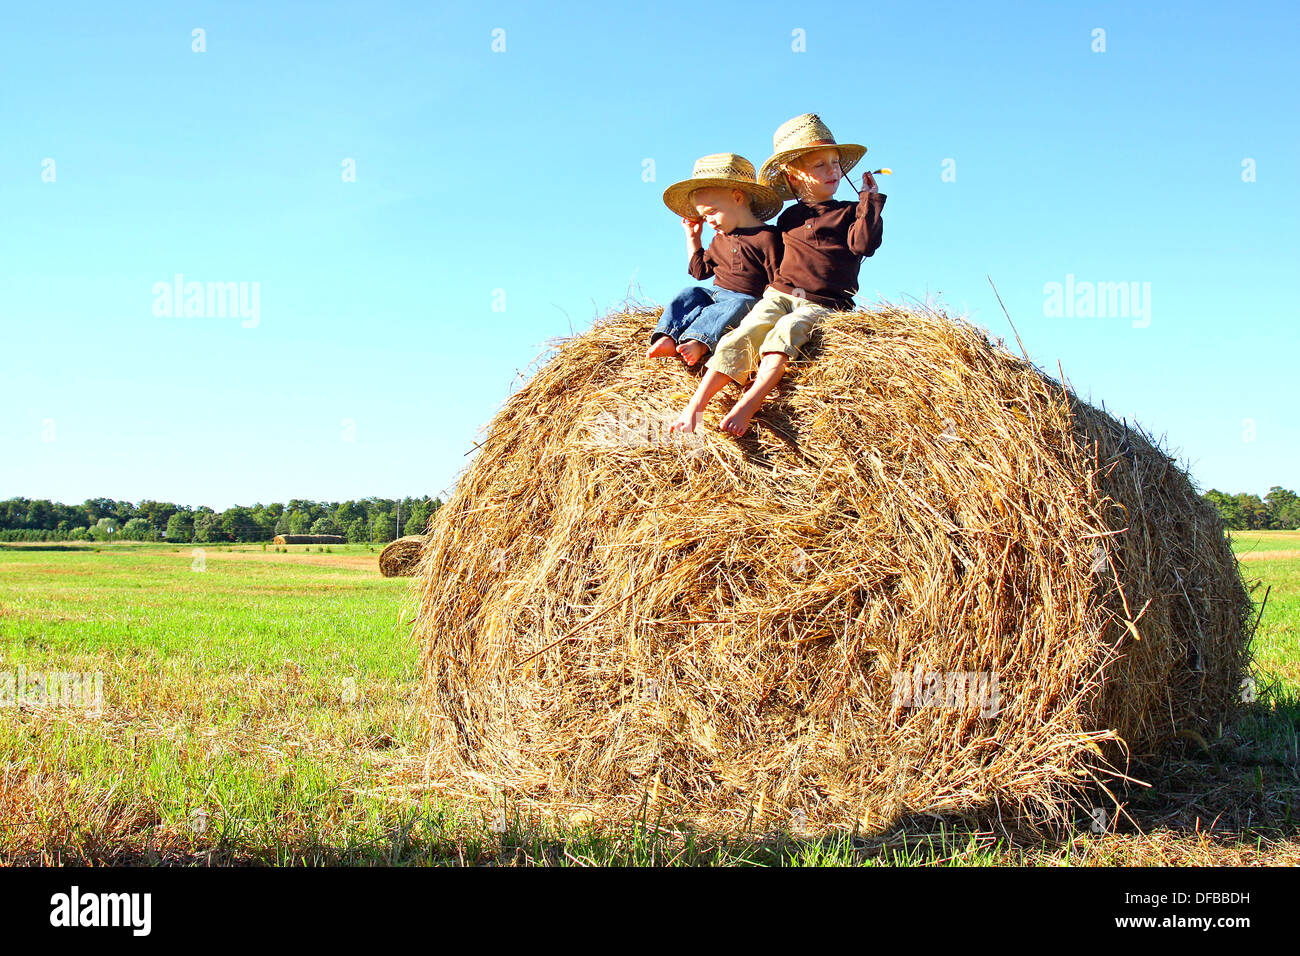 Two happy young children, a boy and his baby brother, are sitting on a hay bale in a field on a farm, wearing straw cowboy hats. Stock Photo